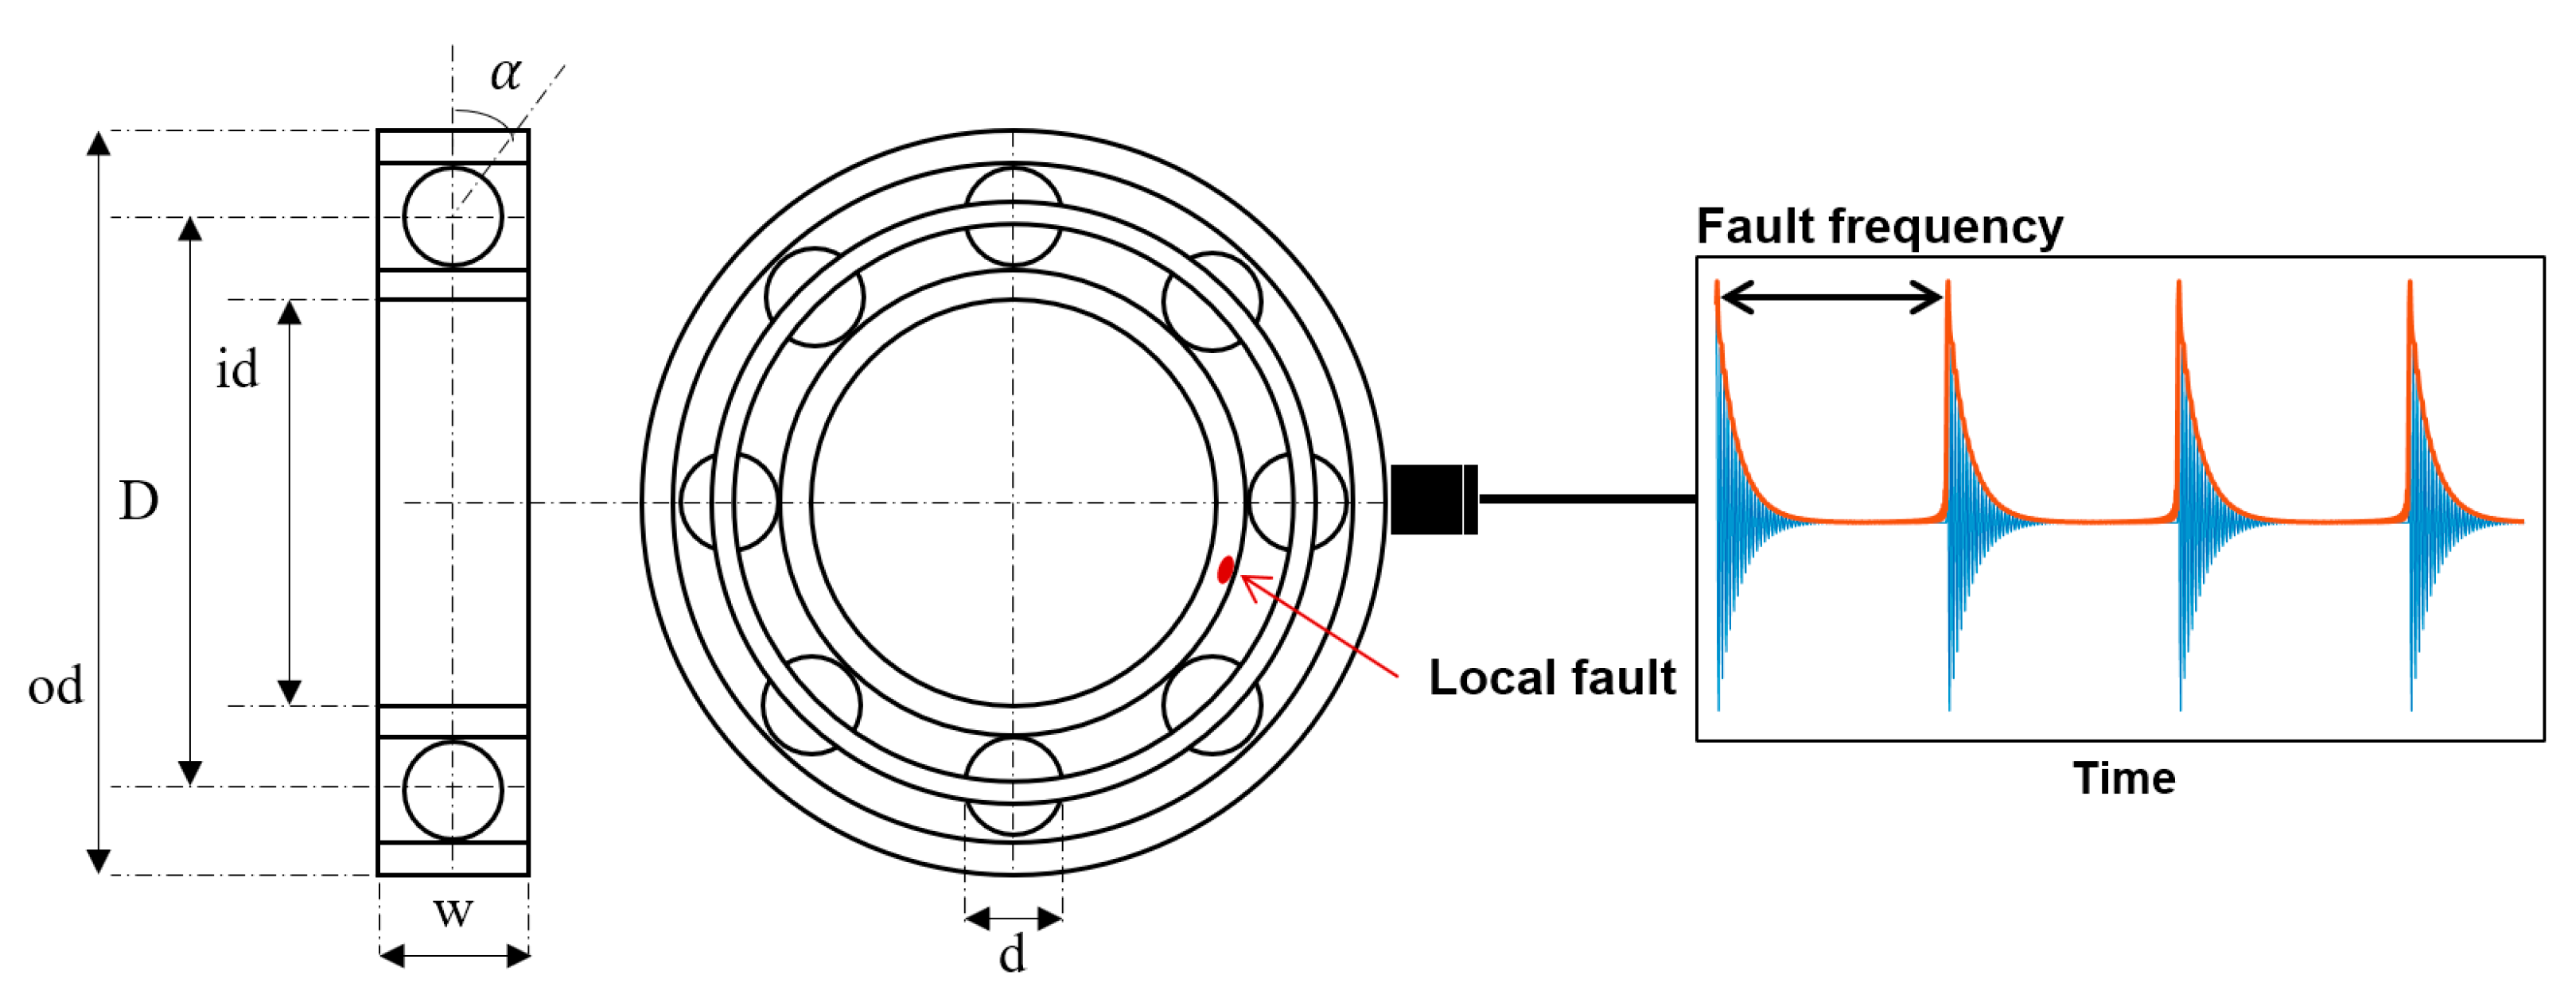 Applied Sciences | Free Full-Text | Diagnostics 101: A Tutorial for Fault  Diagnostics of Rolling Element Bearing Using Envelope Analysis in MATLAB